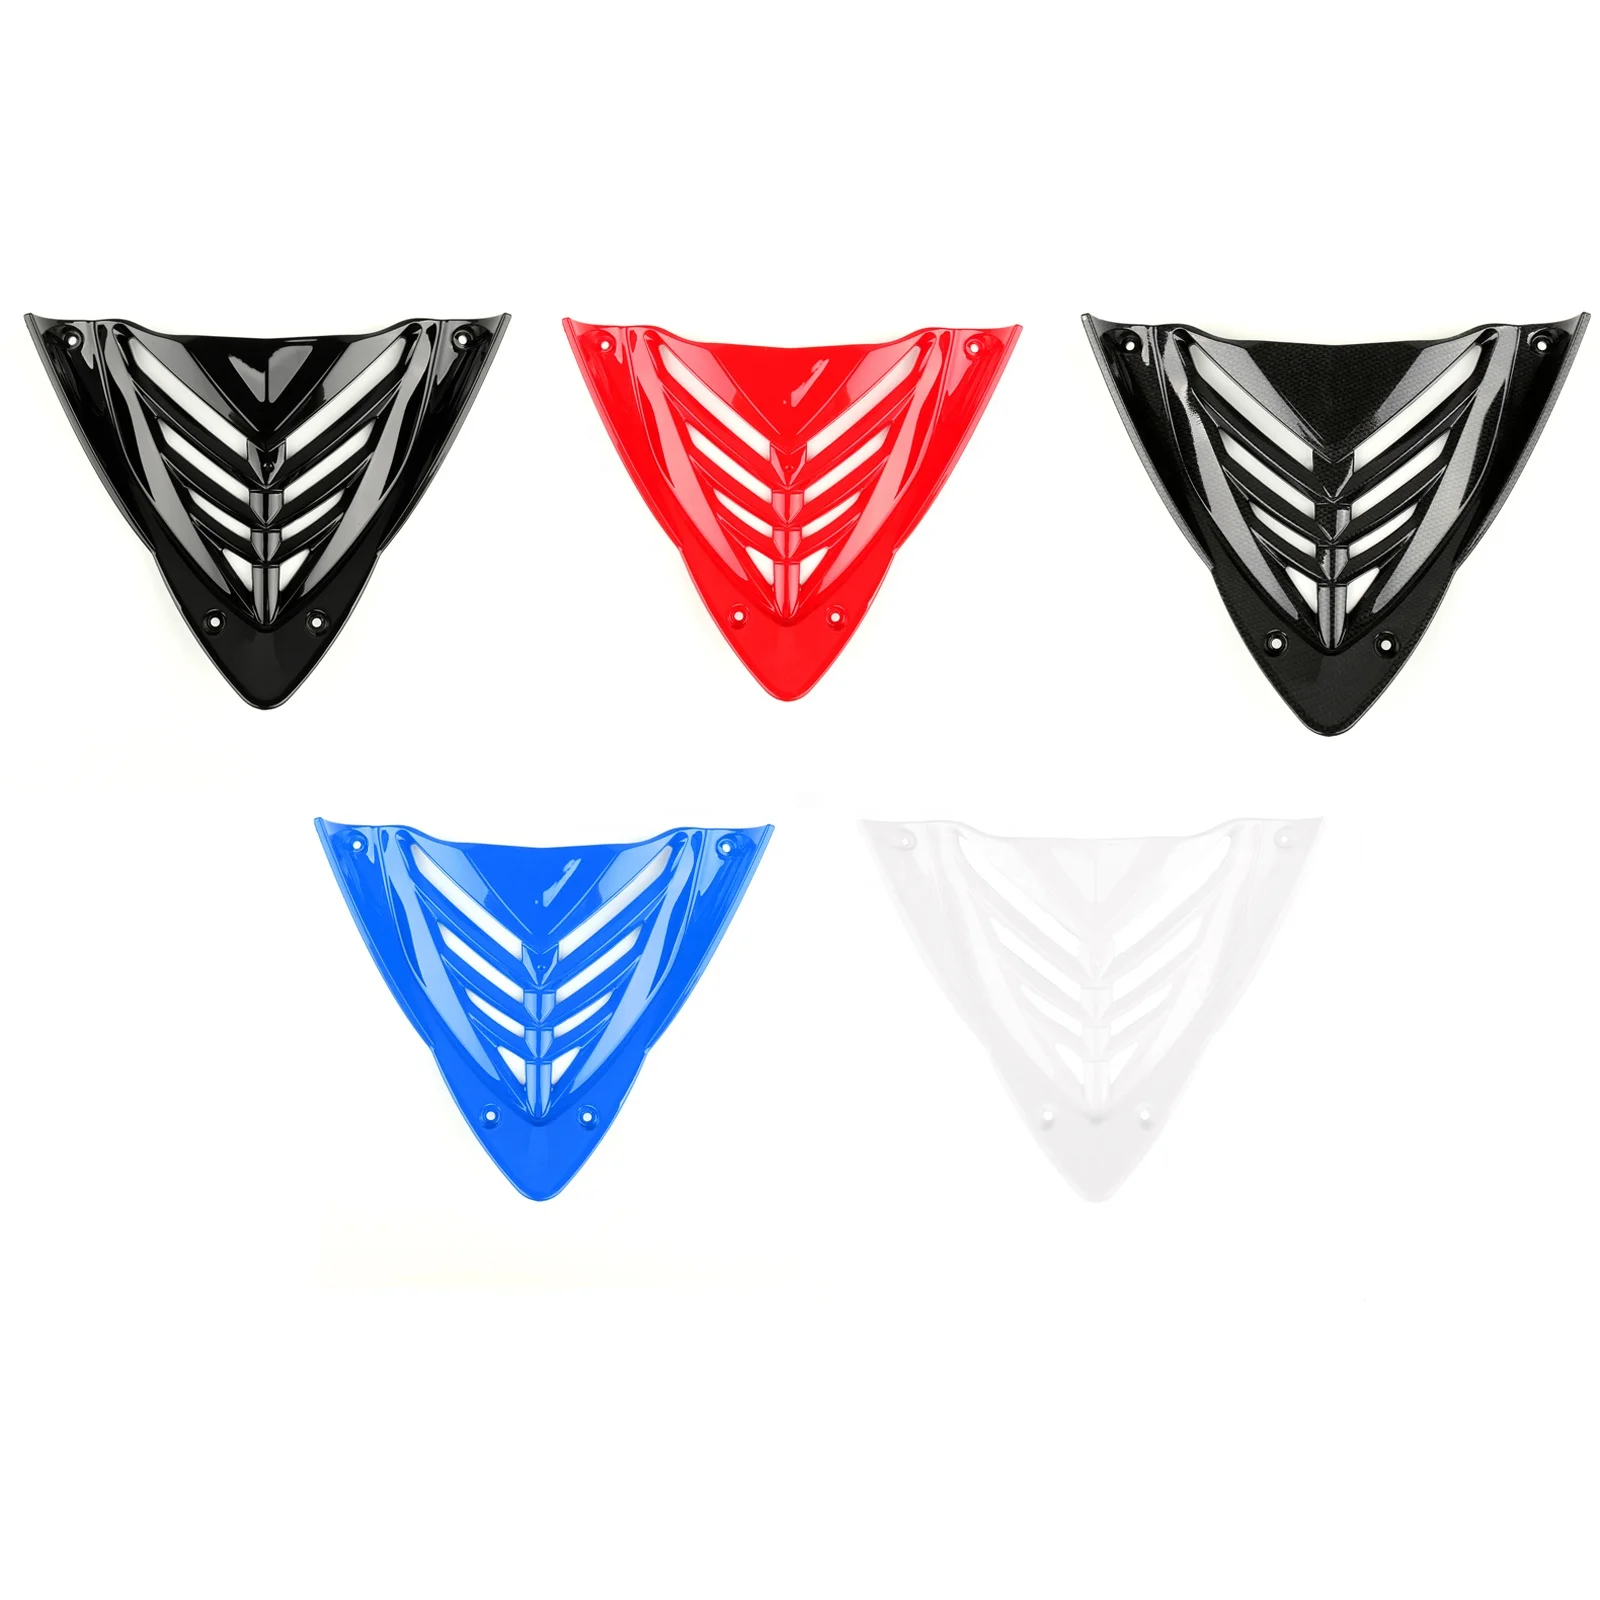 

Free Shipping New ABS V Grill Under Antifouling Cover For Yamaha YZF R25 2014-2018 R3 2015, Black,carbon,white,red,blue